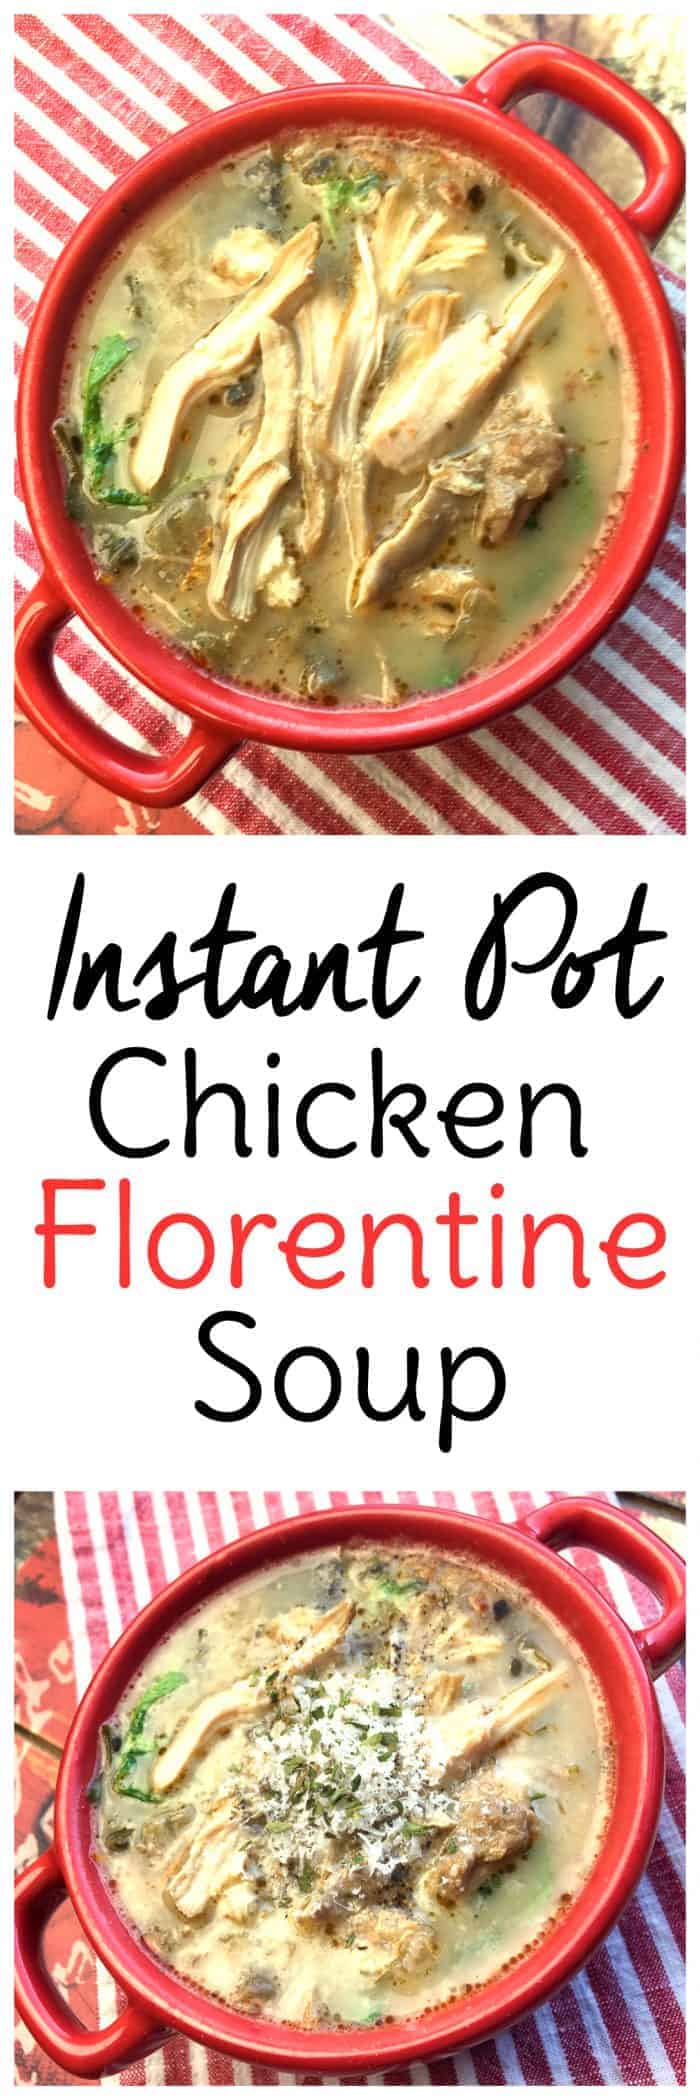 This Instant Pot chicken soup is a some of the best comfort food you'll enjoy this season.